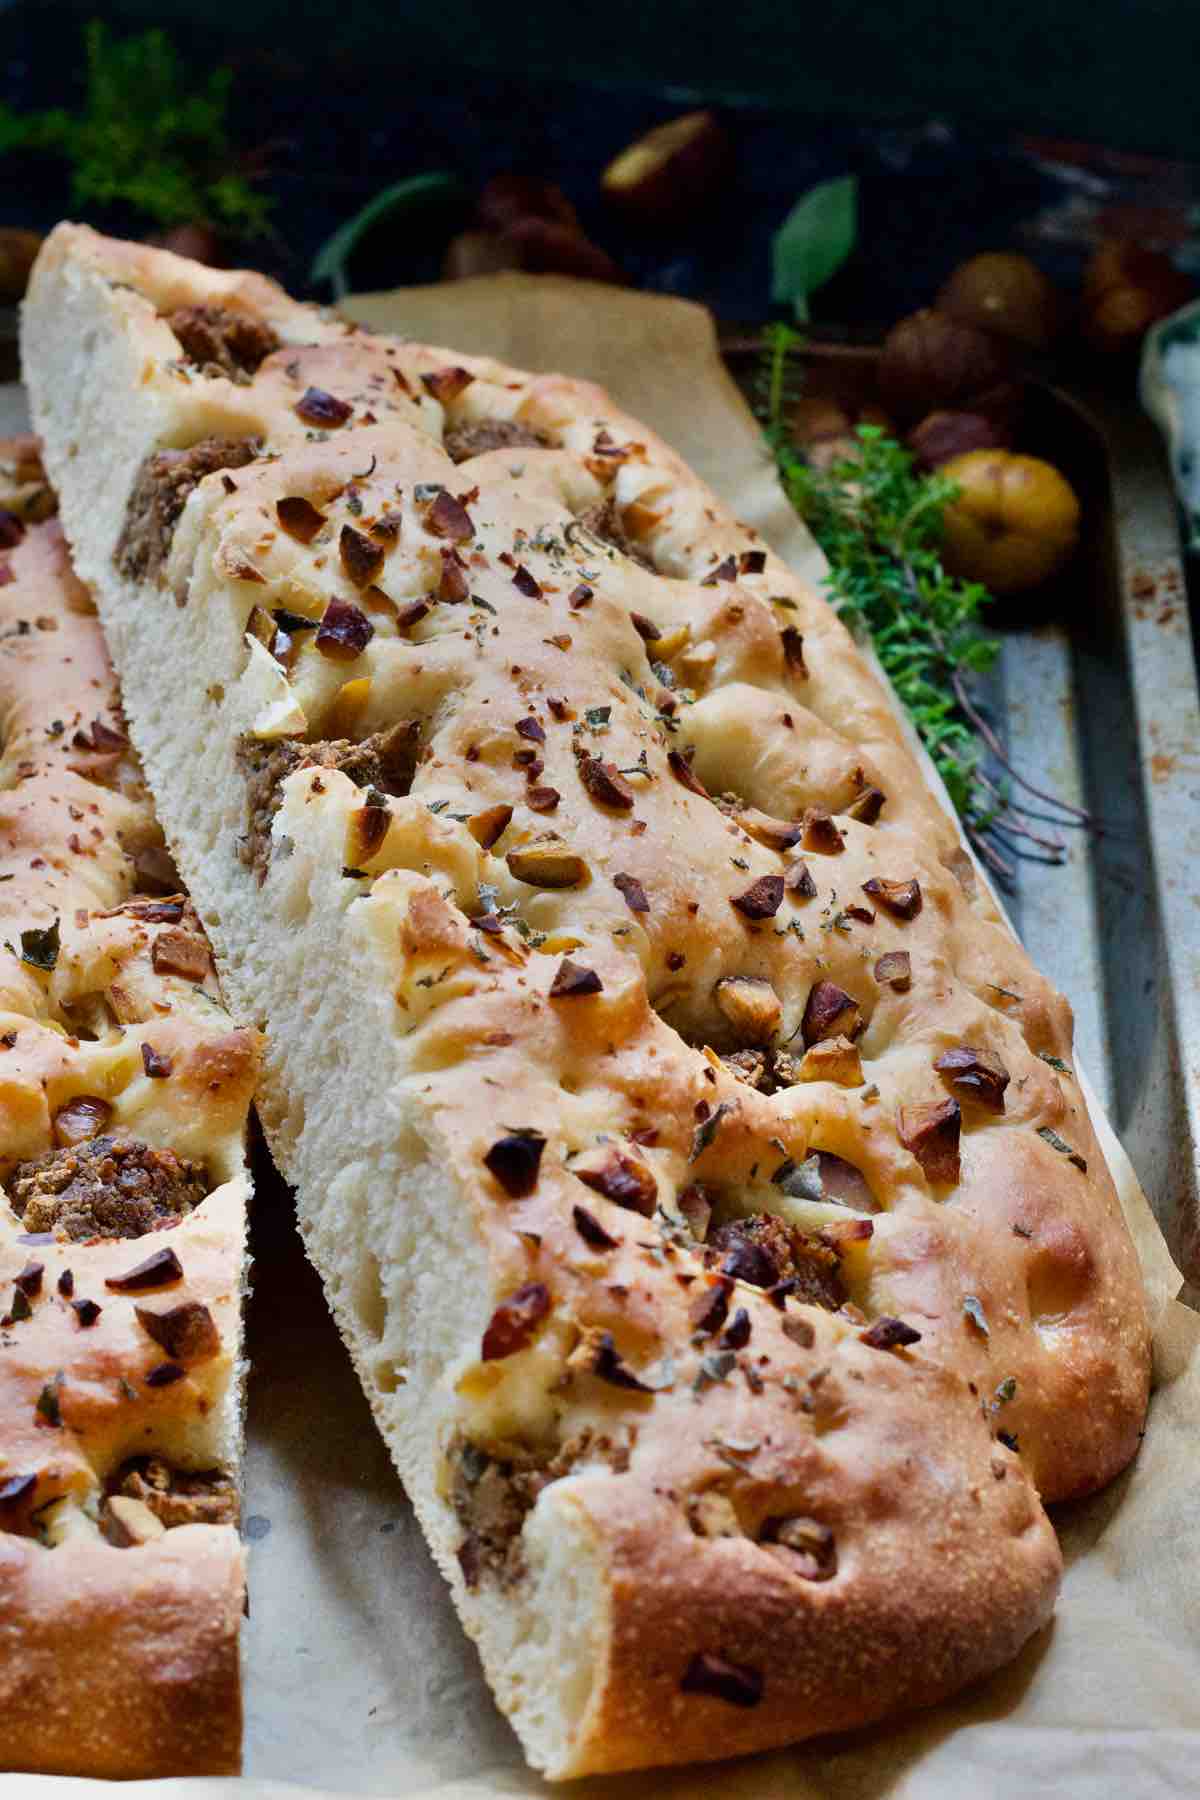 Half of a focaccia slab resting slightly on top of another half.